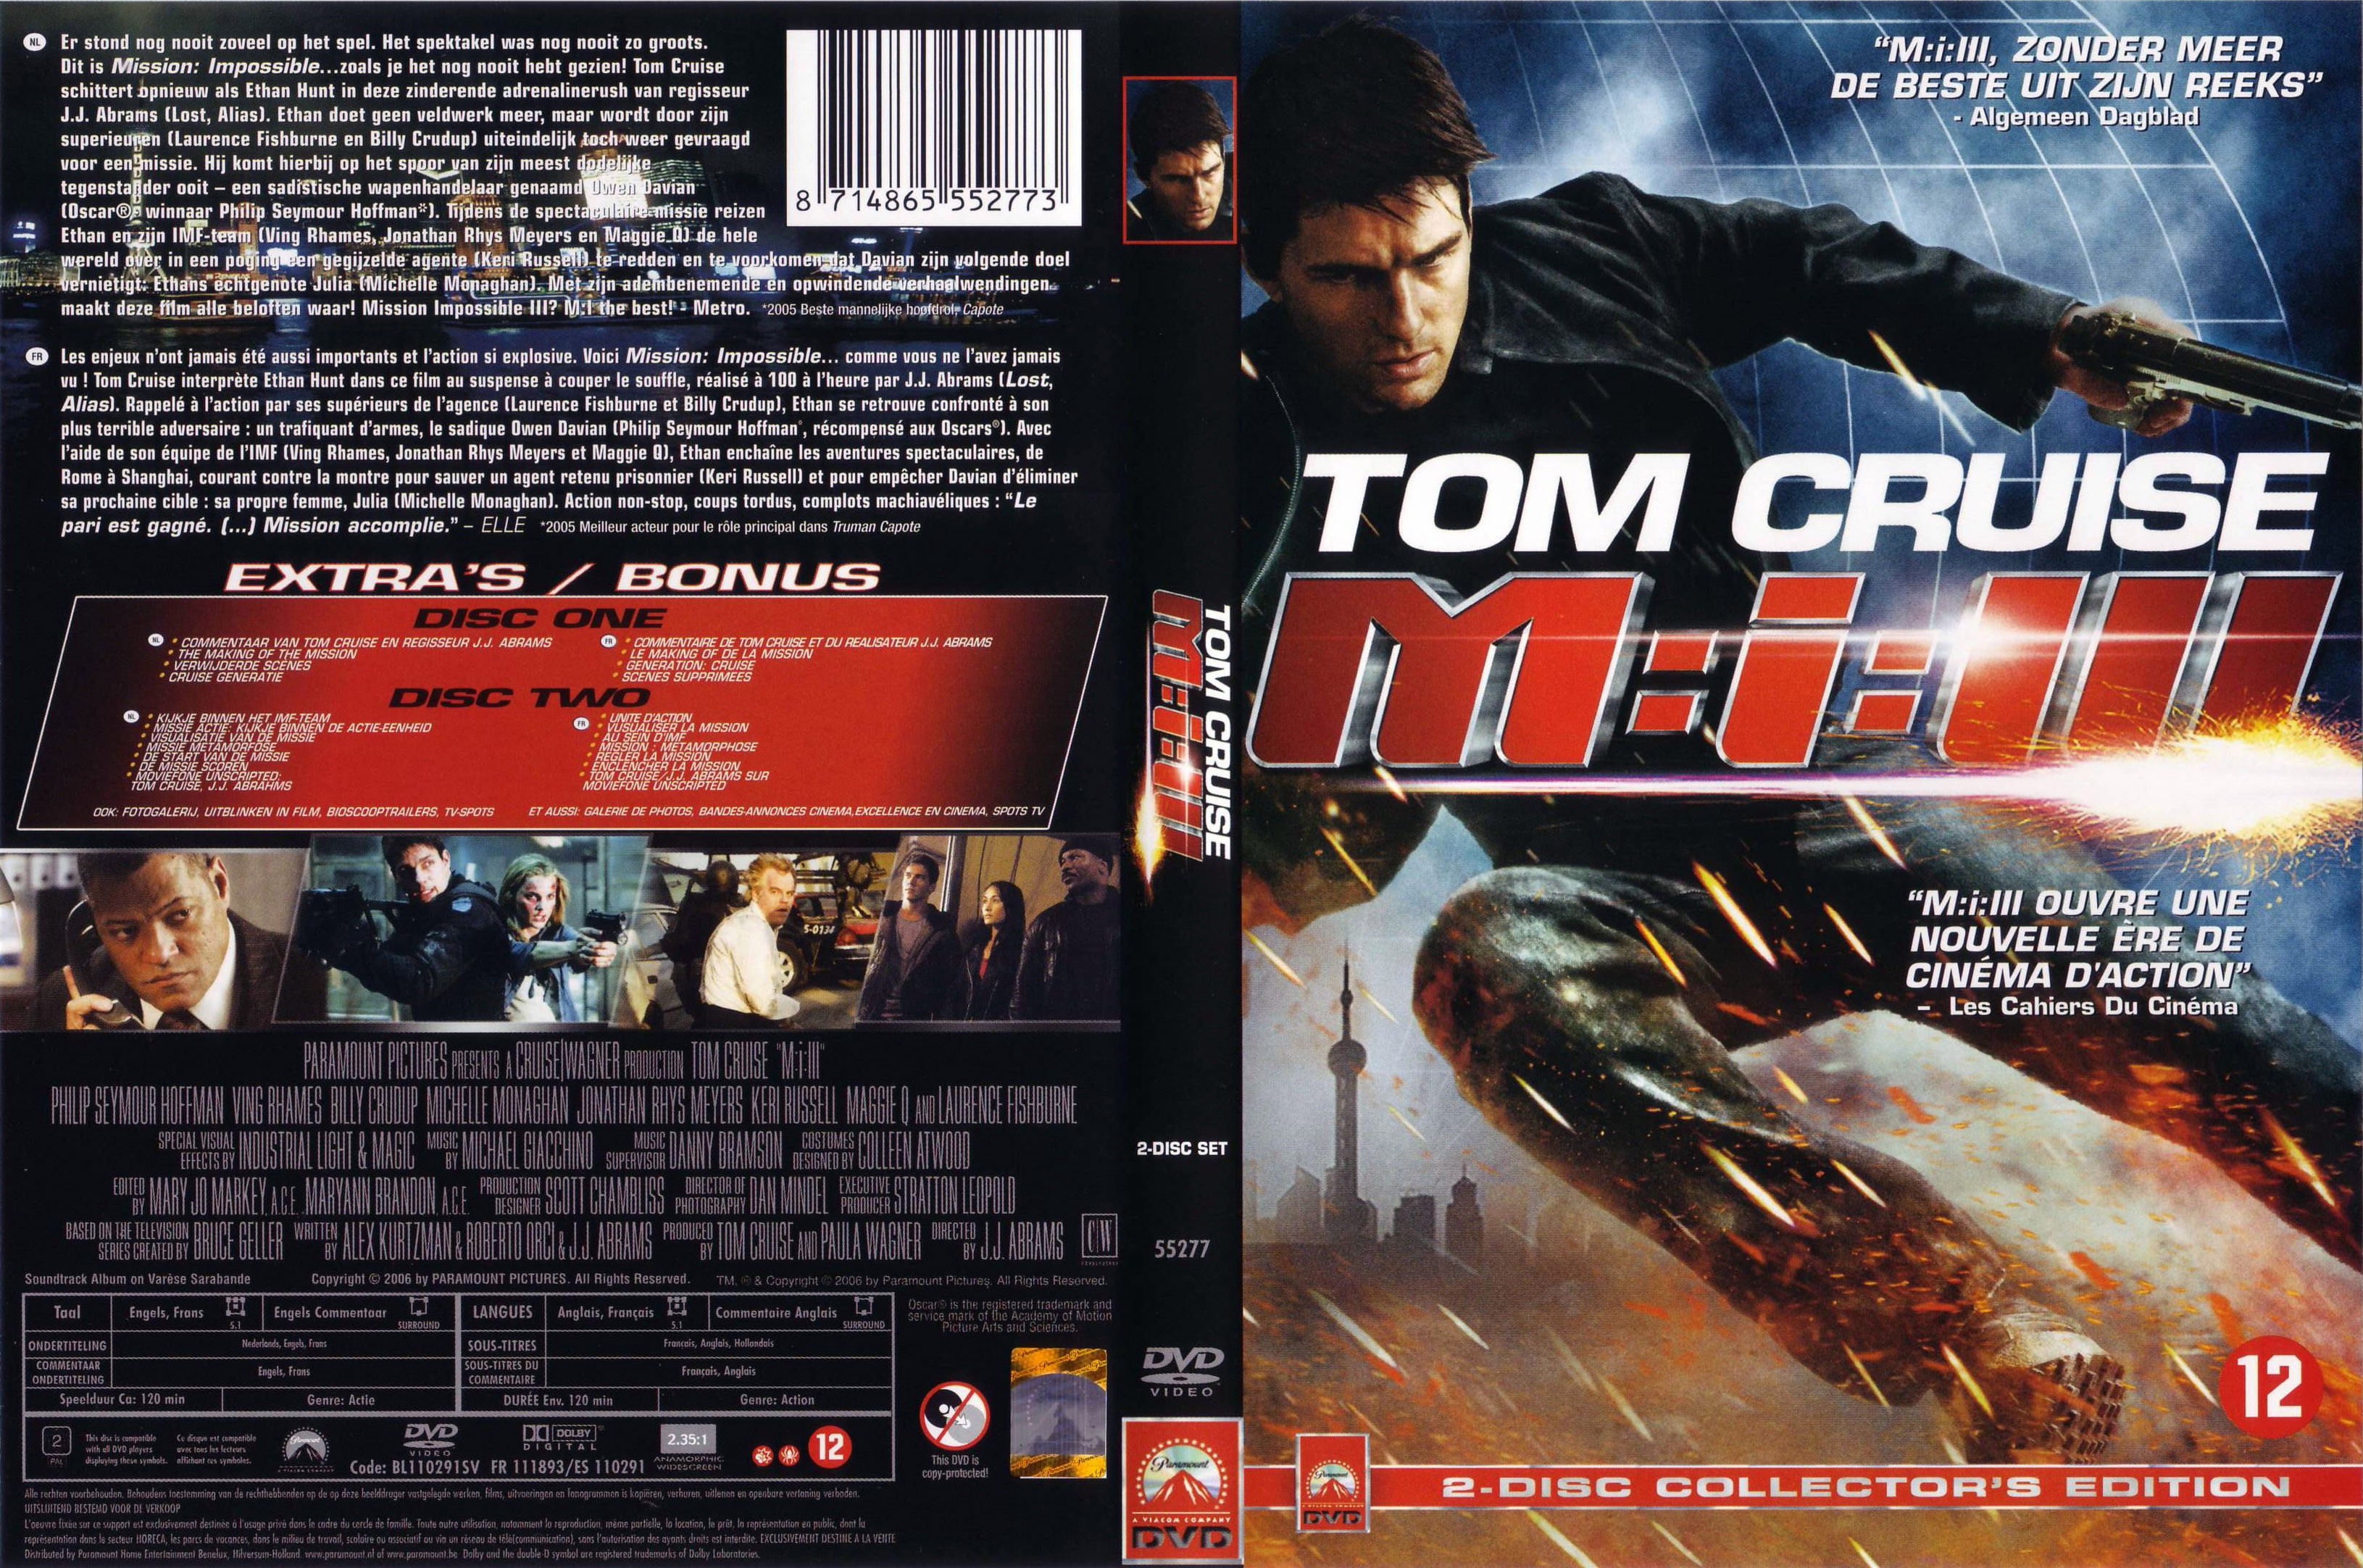 Jaquette DVD Mission impossible 3